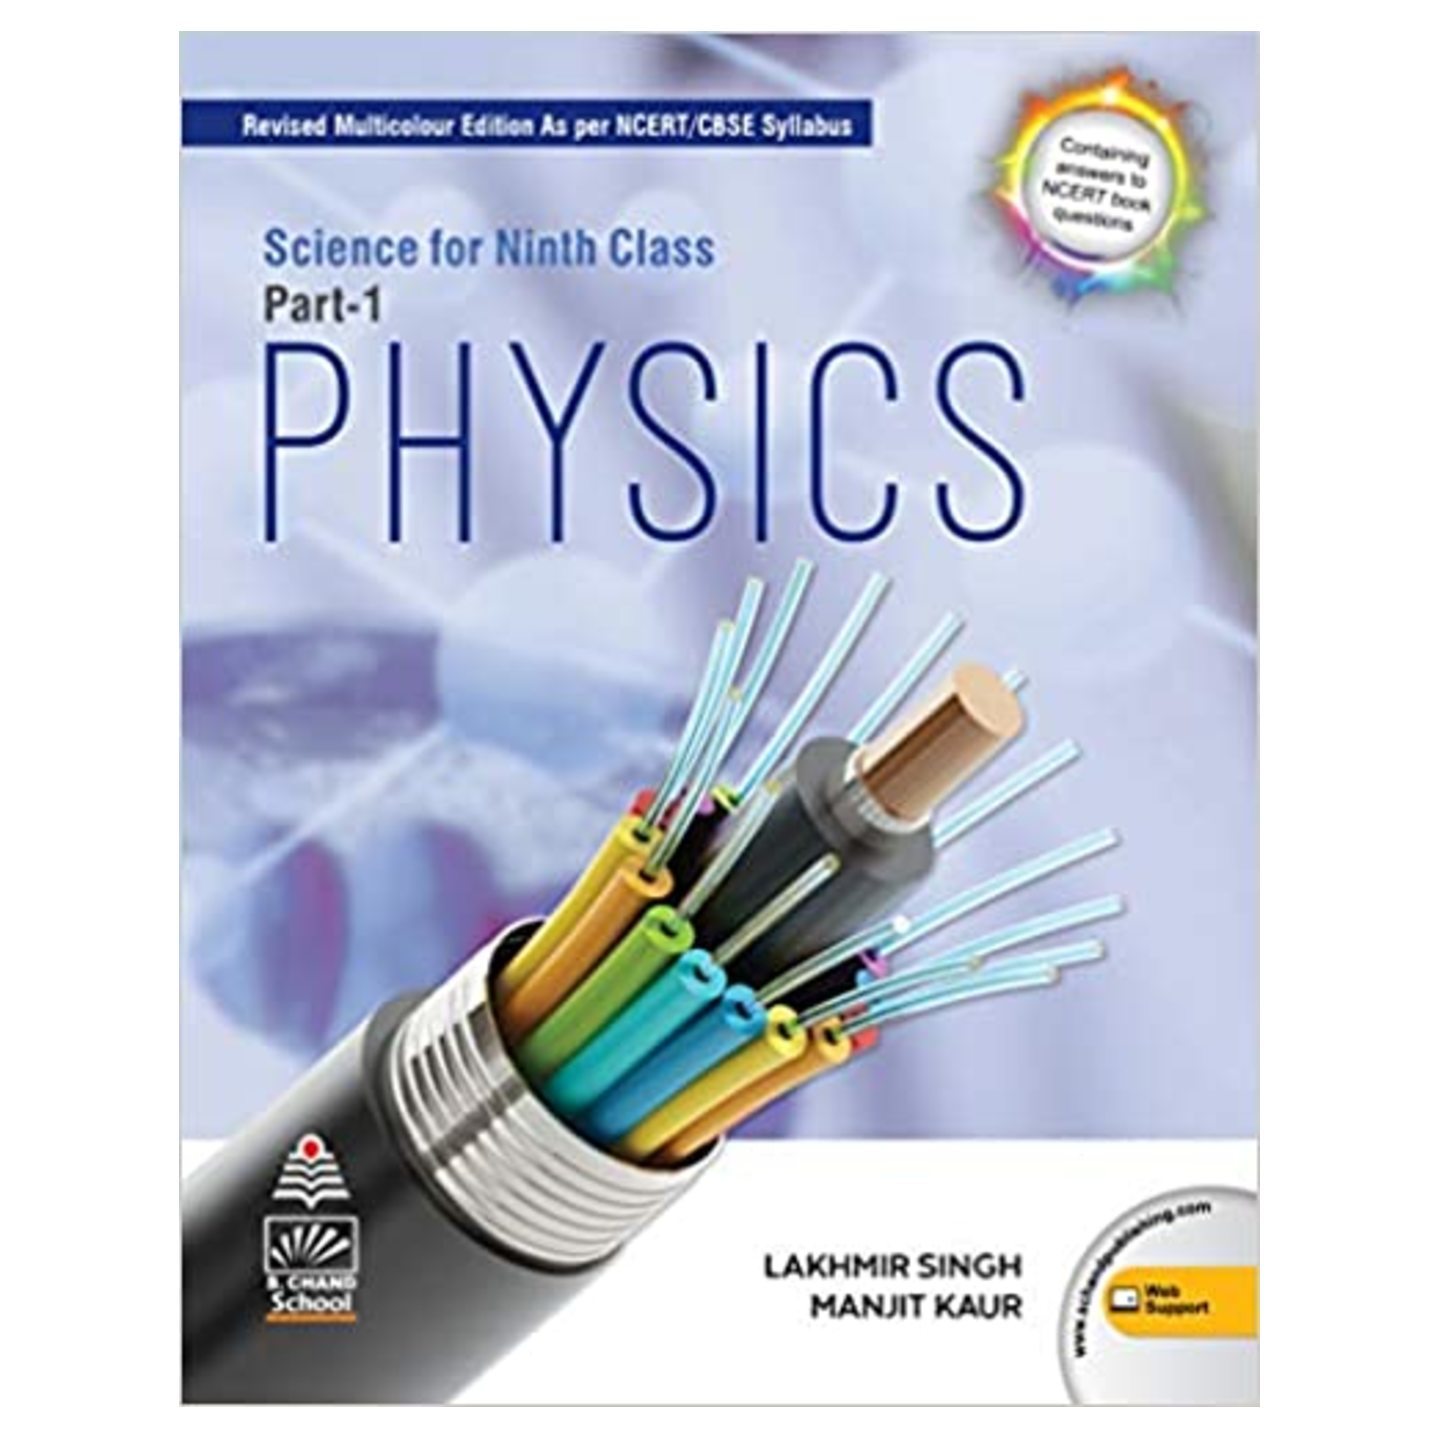 S CHAND Science for Class 9 Part-1 Physics by Lakhmir Singh